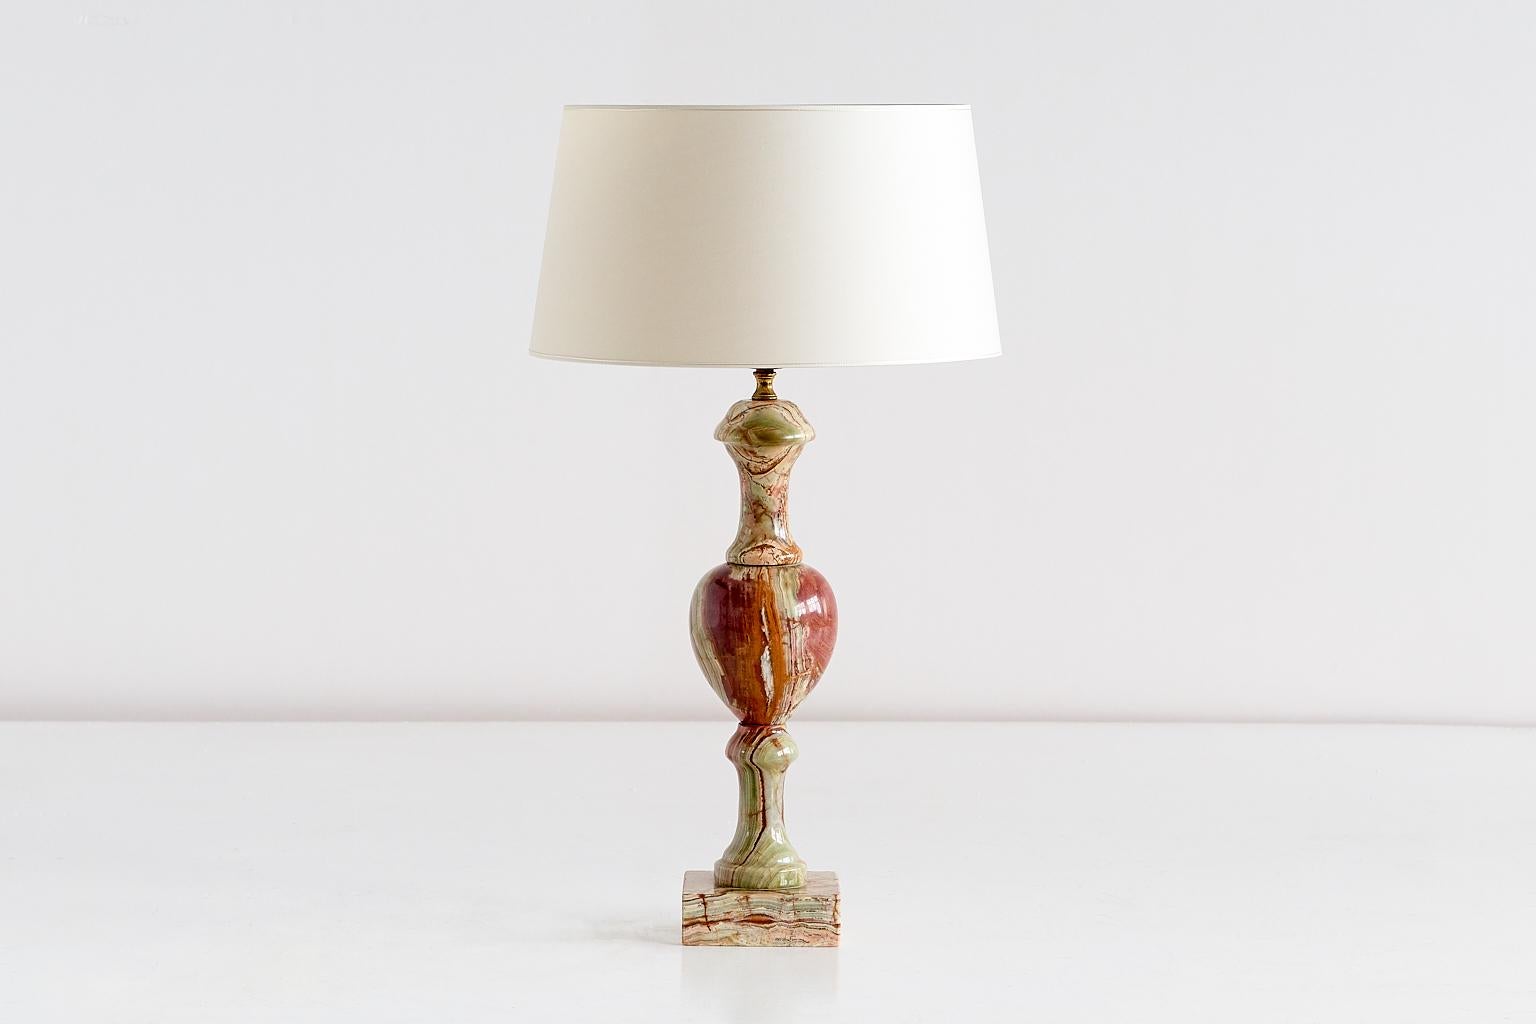 This elegant table lamp was produced in Italy in the late 1970s. The base is a combination of two columns and one oval shape, resting on a square foot, all in multicolored onyx. The contrasting veins of the red, white and green onyx give the lamp a